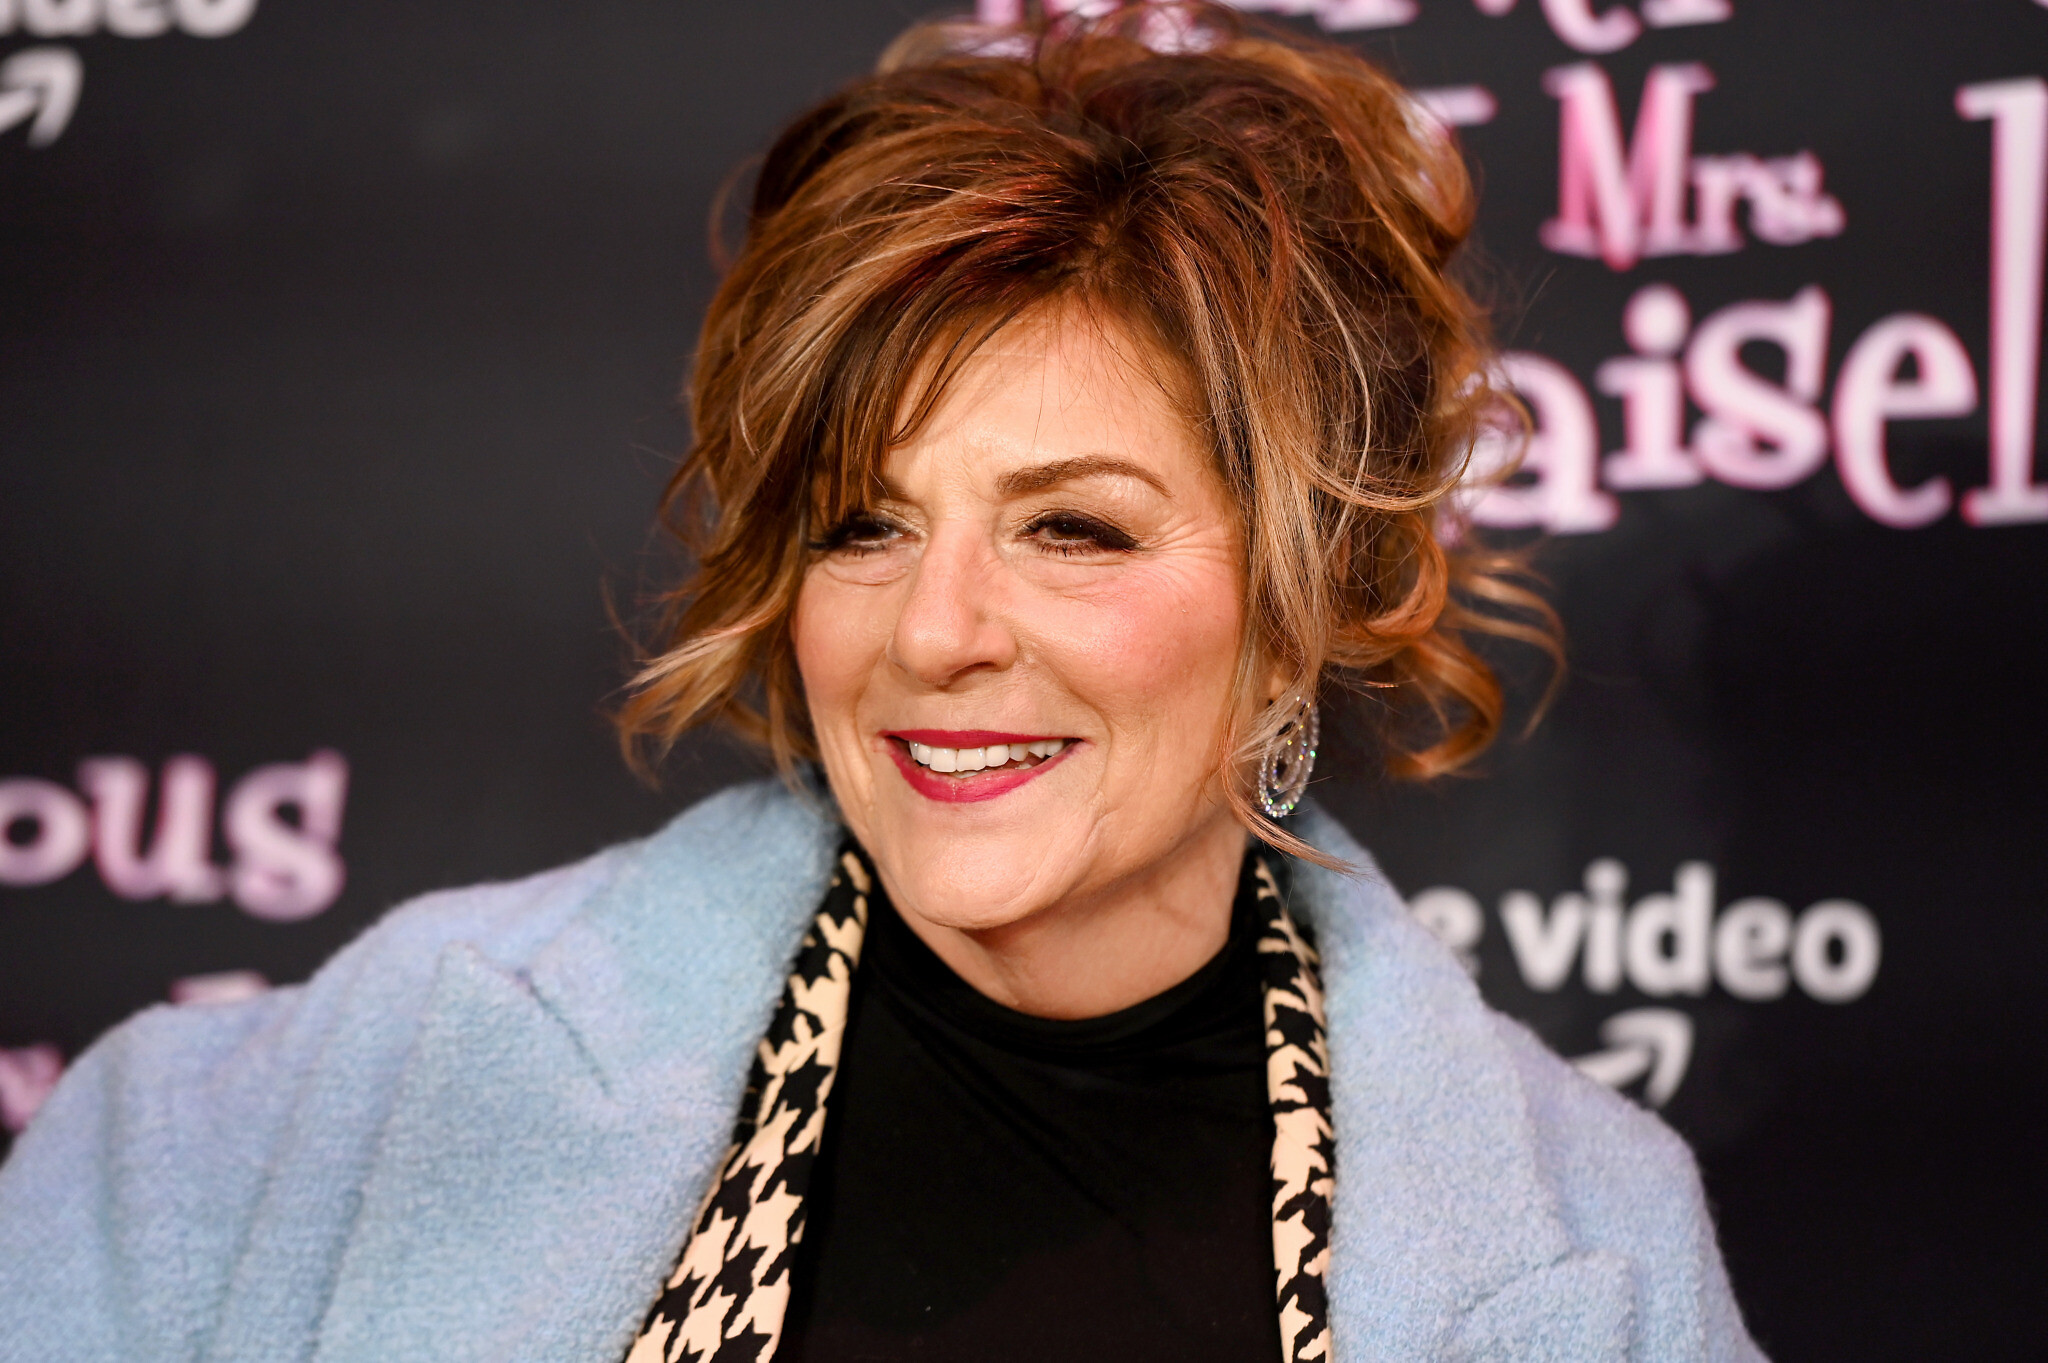 Marvelous Mrs. Maisel' star Caroline Aaron made a career out of